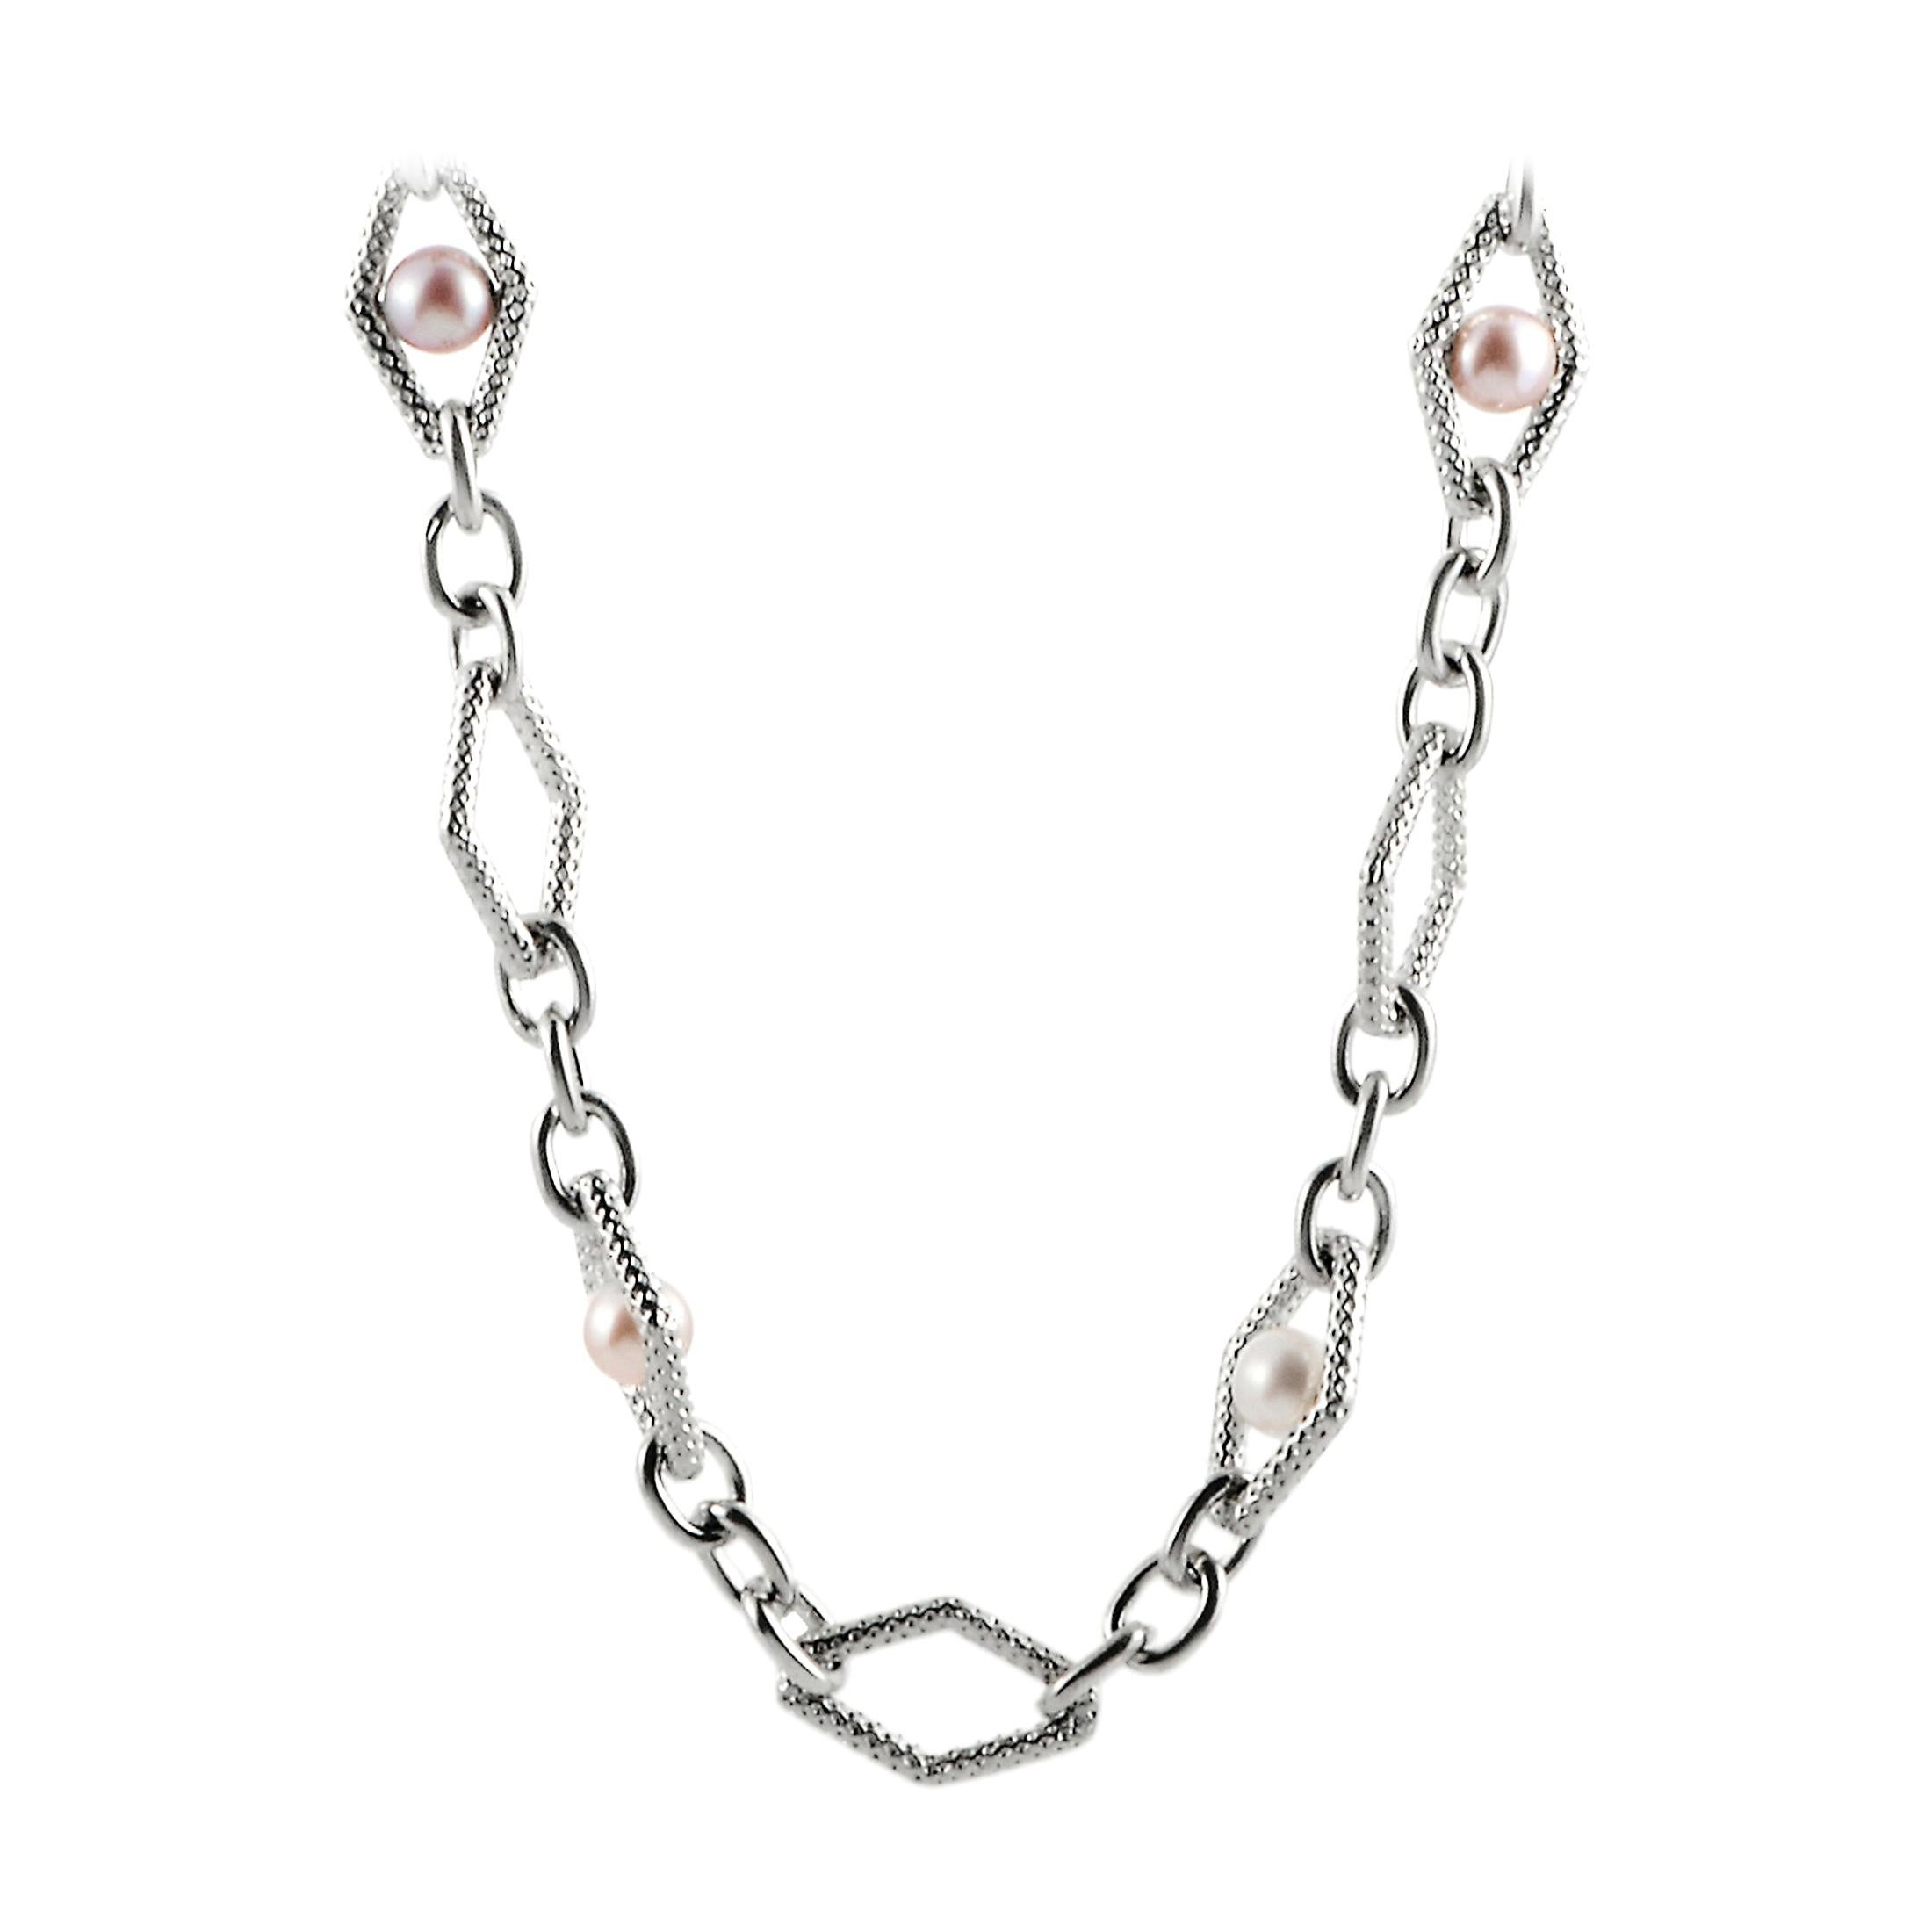 Charles Krypell Silver and Pearl Long Chain Necklace